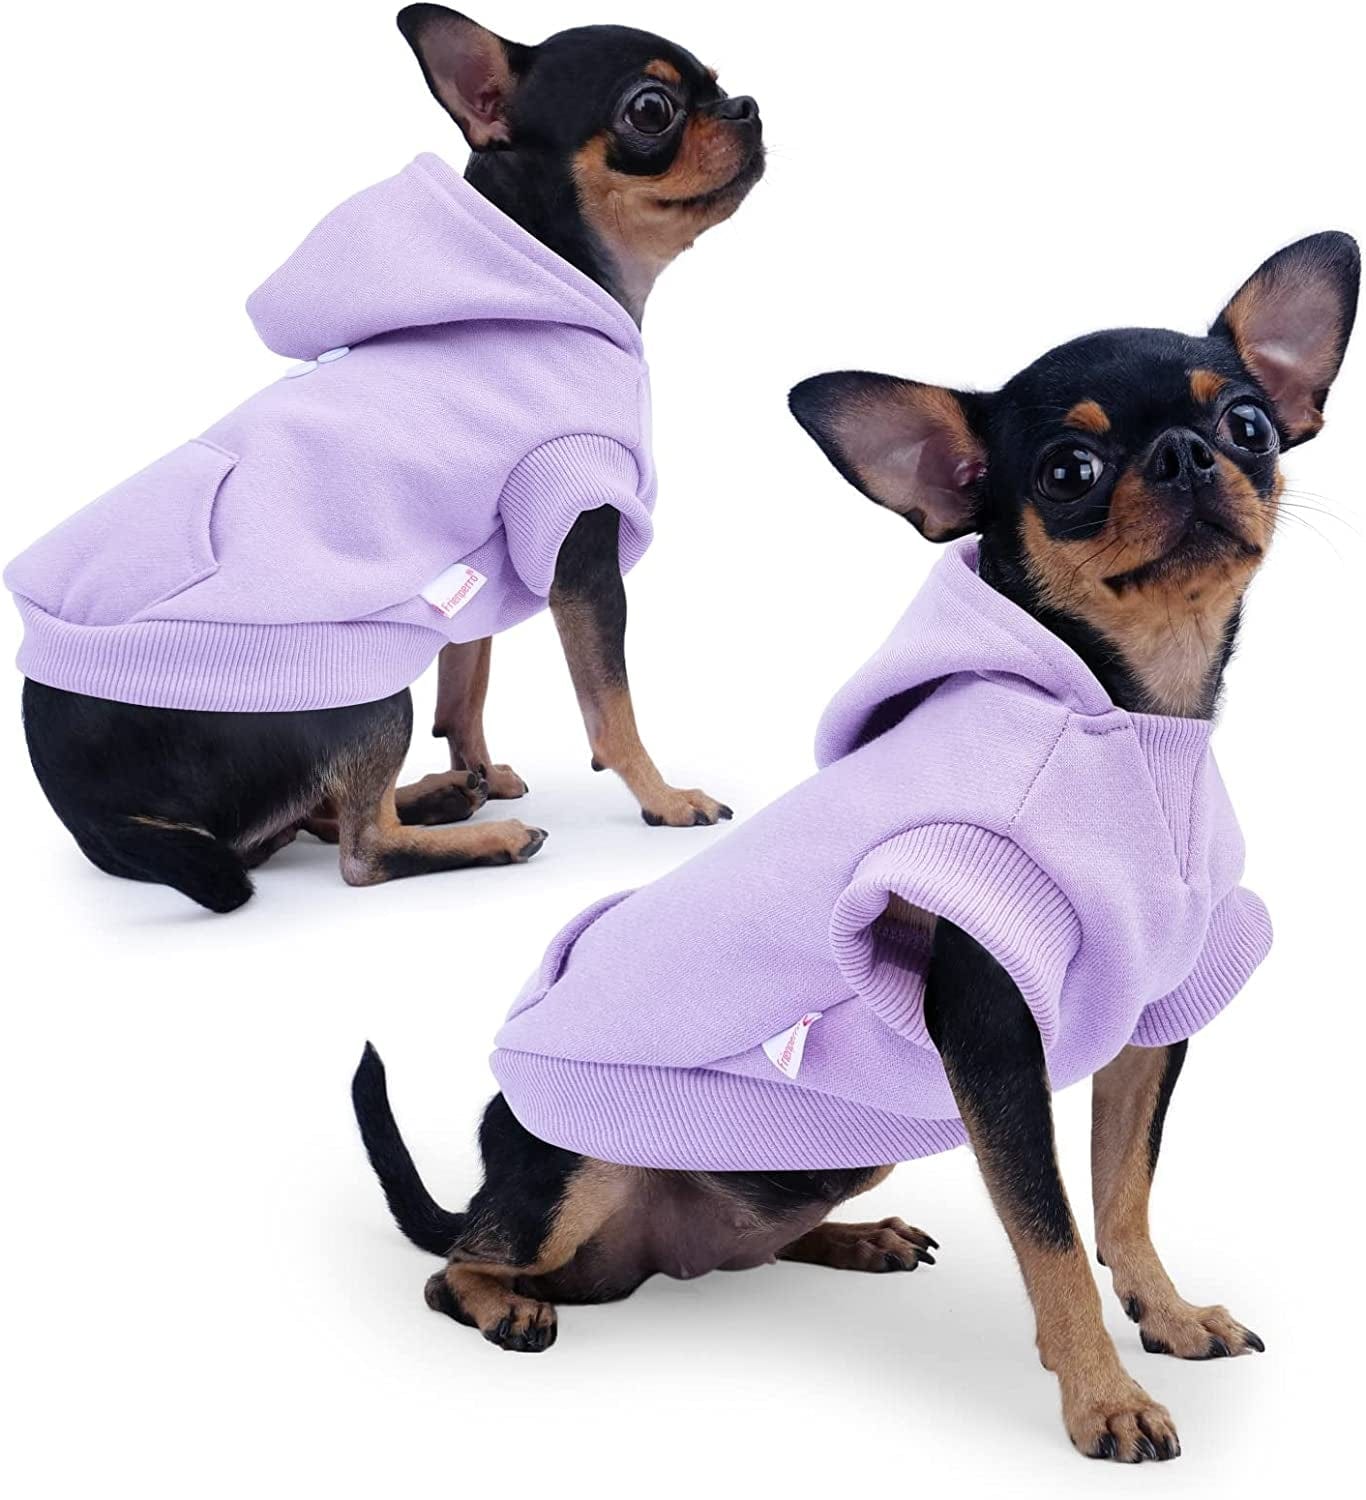 𝐍𝐄𝐖 𝐀𝐑𝐑𝐈𝐕𝐀𝐋 Frienperro Dog Clothes for Small Dogs Girl Boy, 100% Cotton Buffalo Plaid Small Dog Hoodie, Chihuahua Clothes Pet Cat Winter Warm Sweatshirt Sweater, Teacup Yorkie Puppy Coat Animals & Pet Supplies > Pet Supplies > Dog Supplies > Dog Apparel Frienperro Purple X-Small 